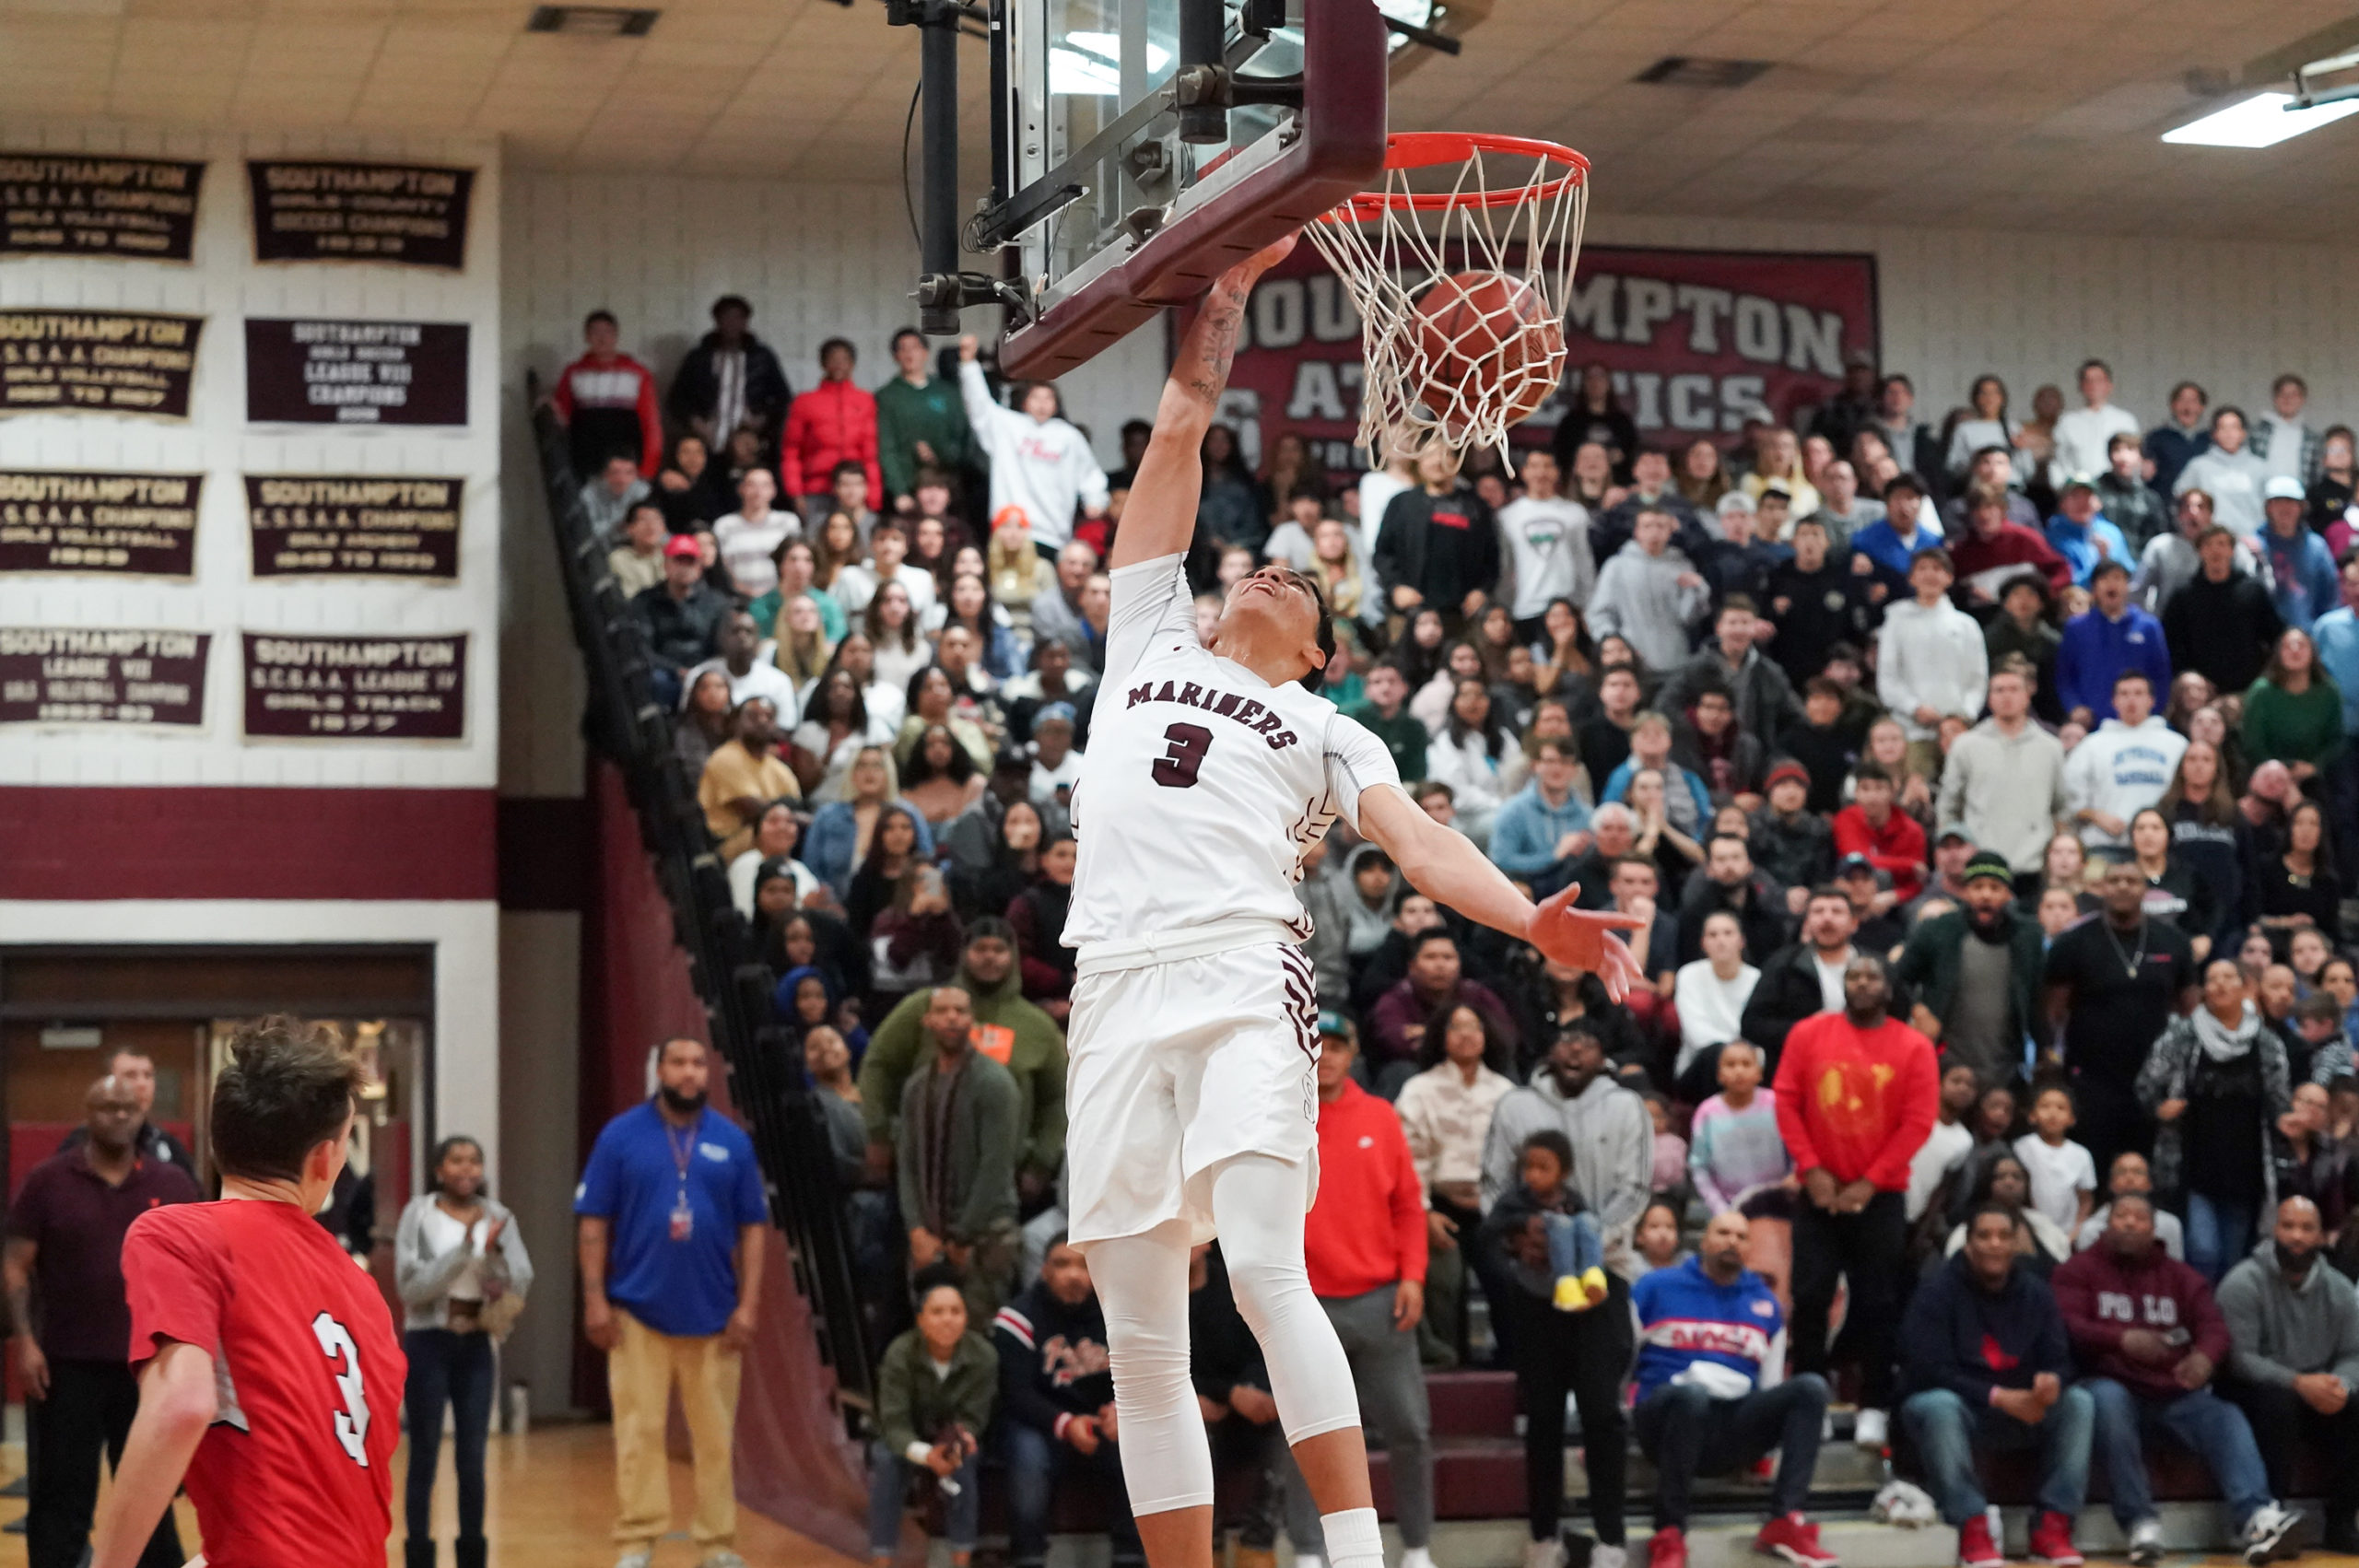 Southampton senior Dakoda Smith finishes a fast break with a dunk bringing the home crowd to its feet.